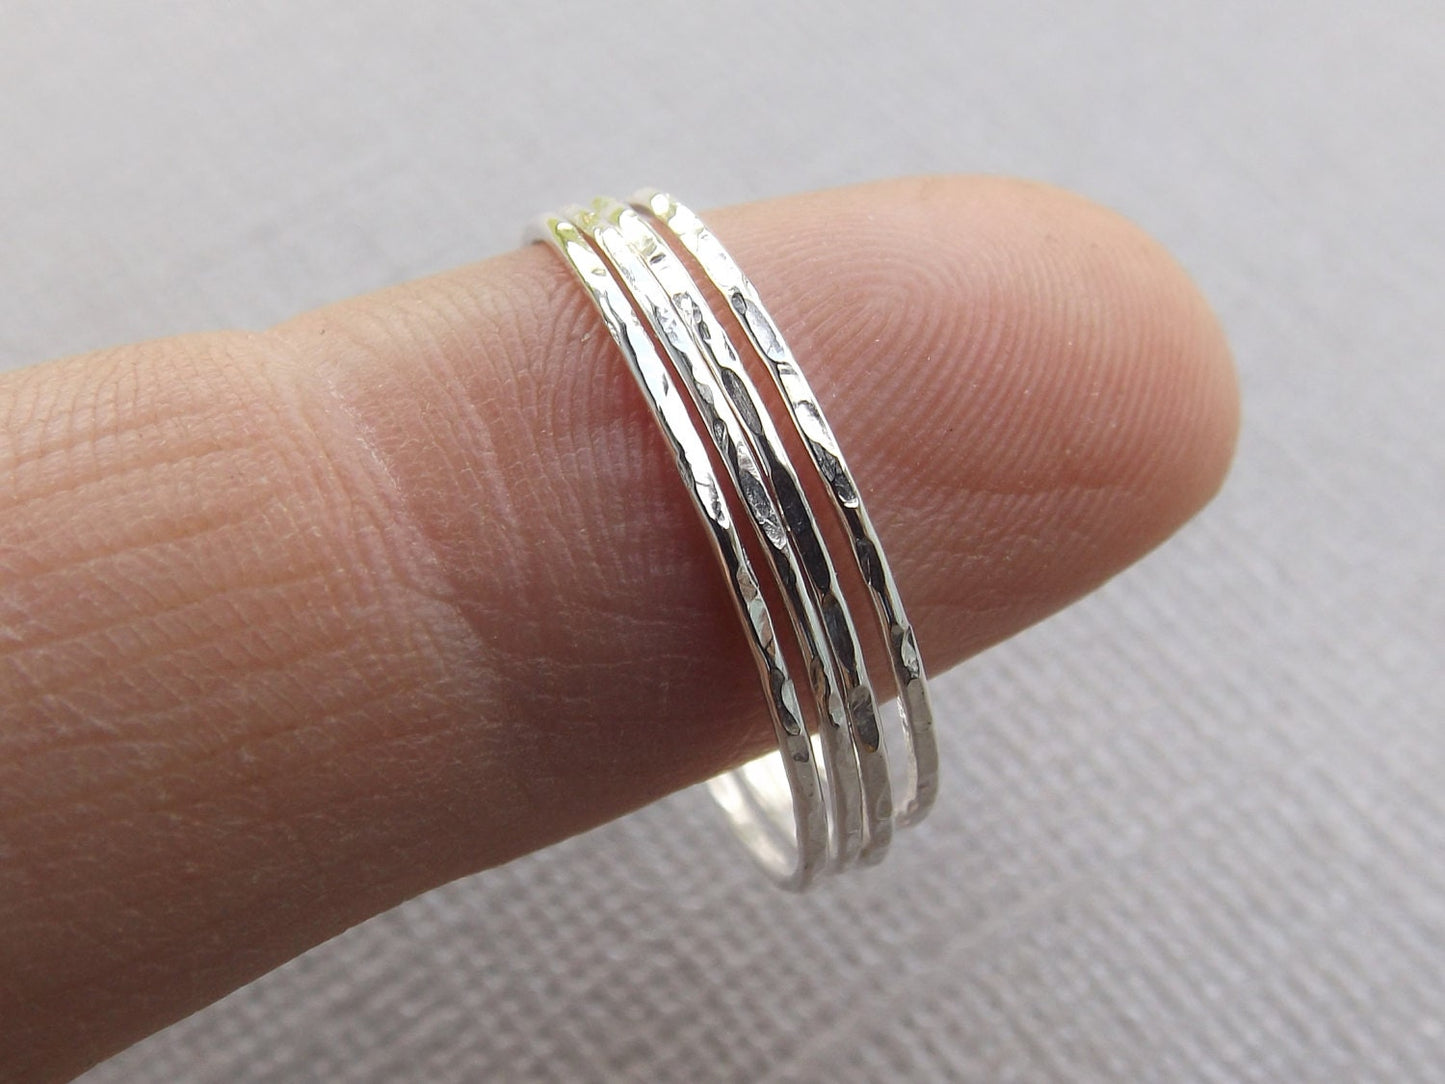 Build A Set!Super Skinny Stacking,Knuckle, or Thumb Rings,Gold Rings,Stacking Rings,Knuckle Ring,Skinny Rings,Thin Rings, Hammered Ring